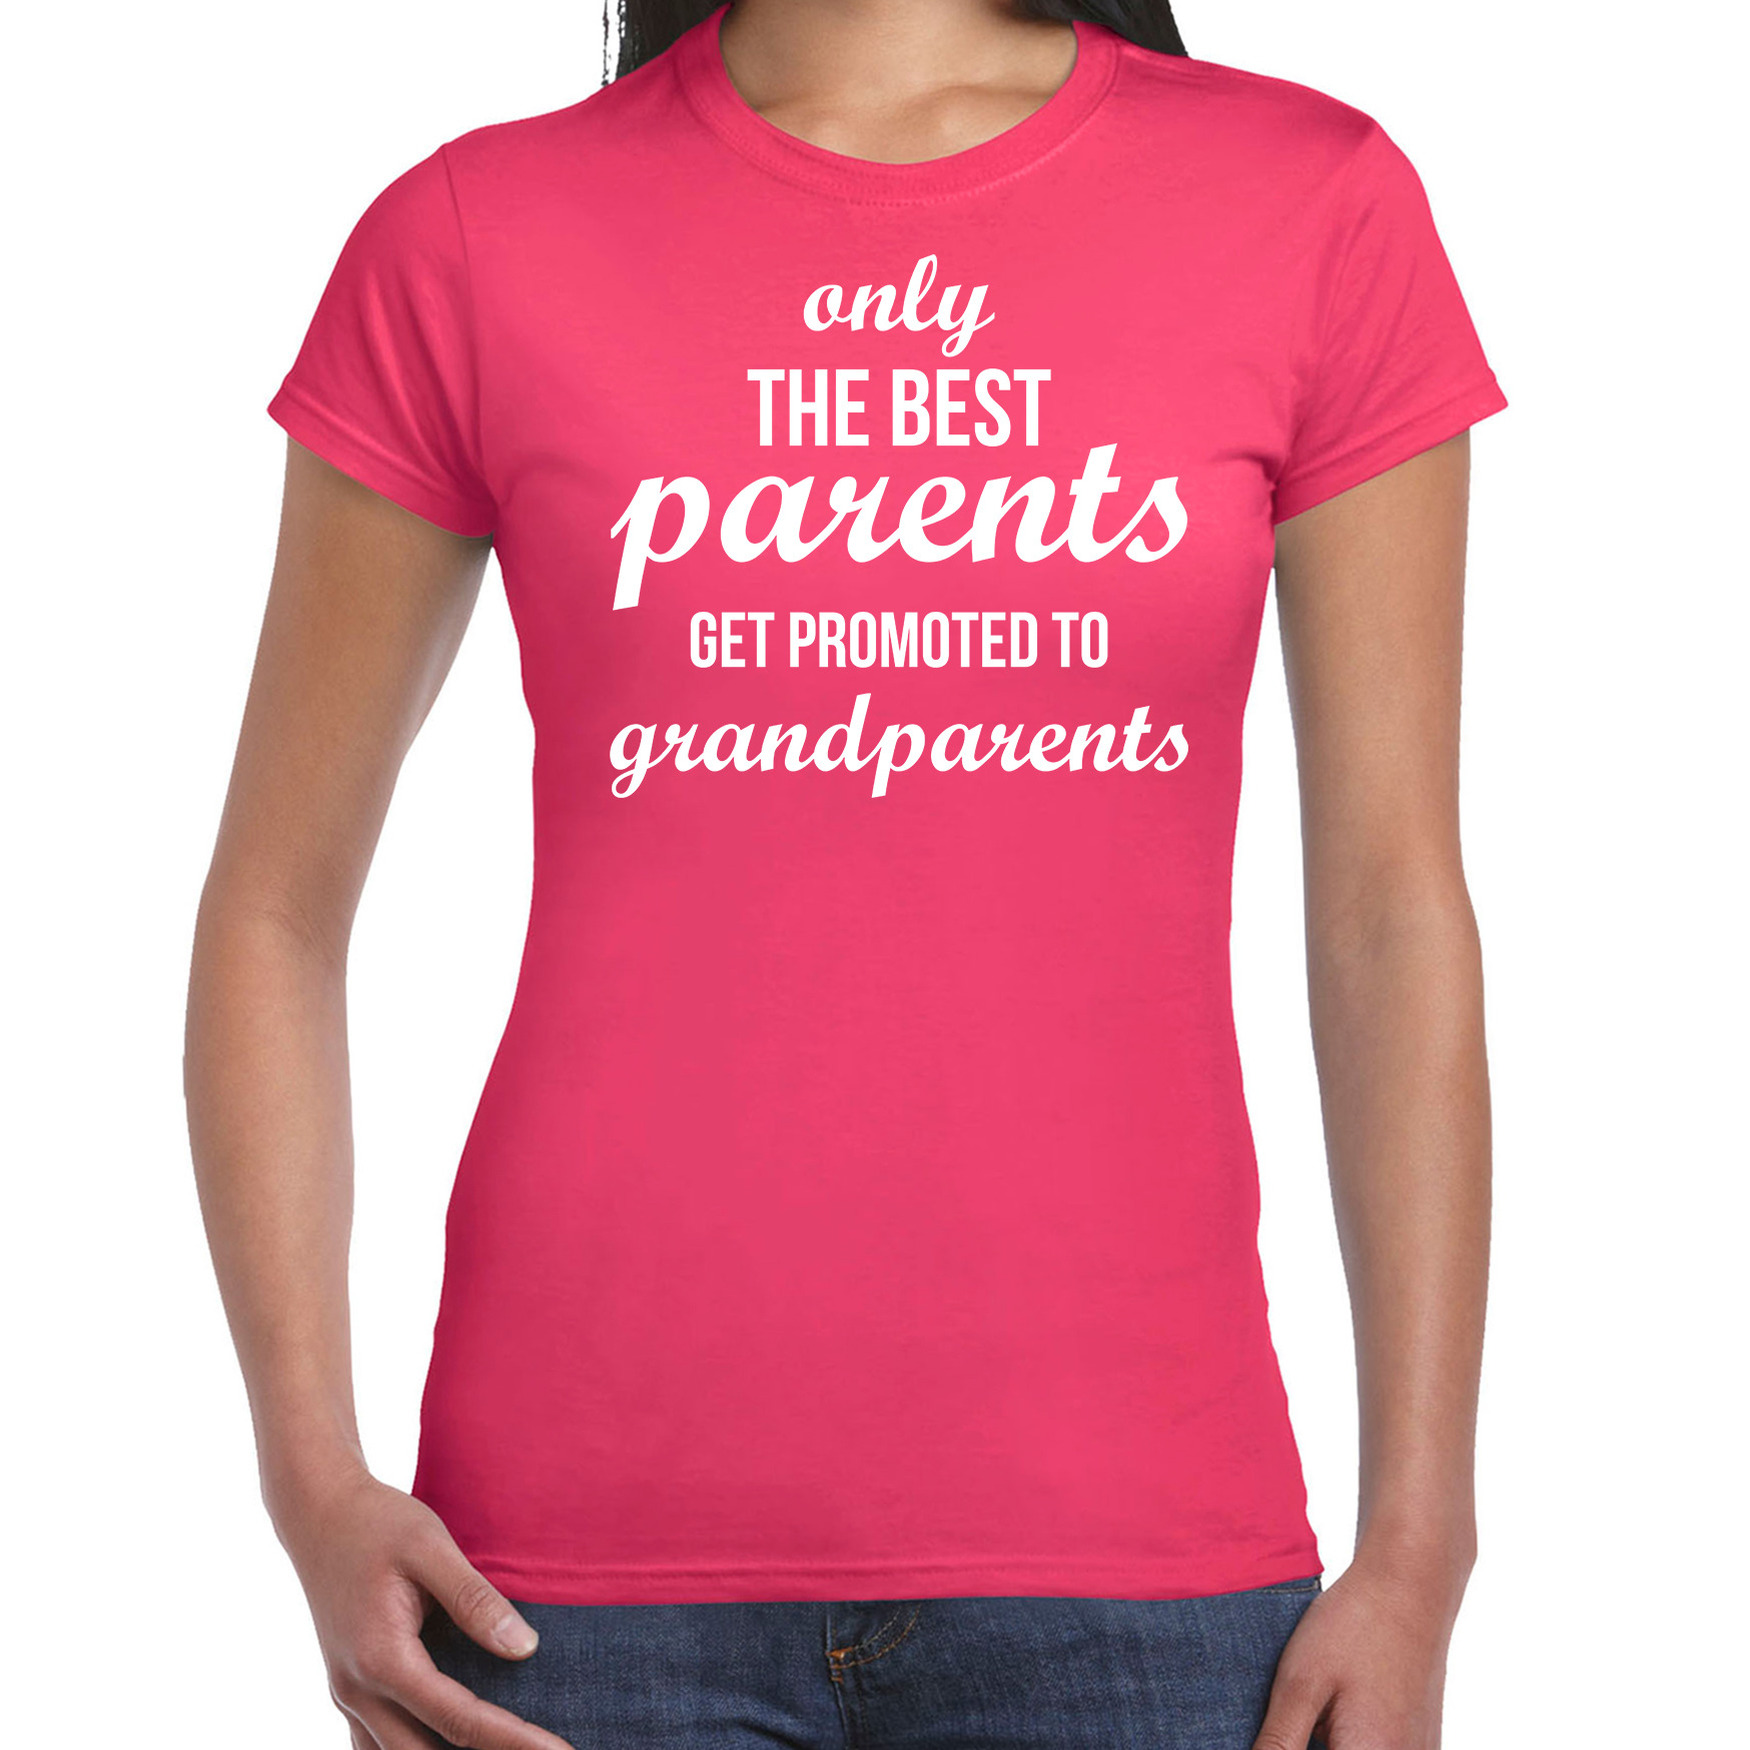 Only the best parents get promoted to grandparents t-shirt fuchsia roze voor dames